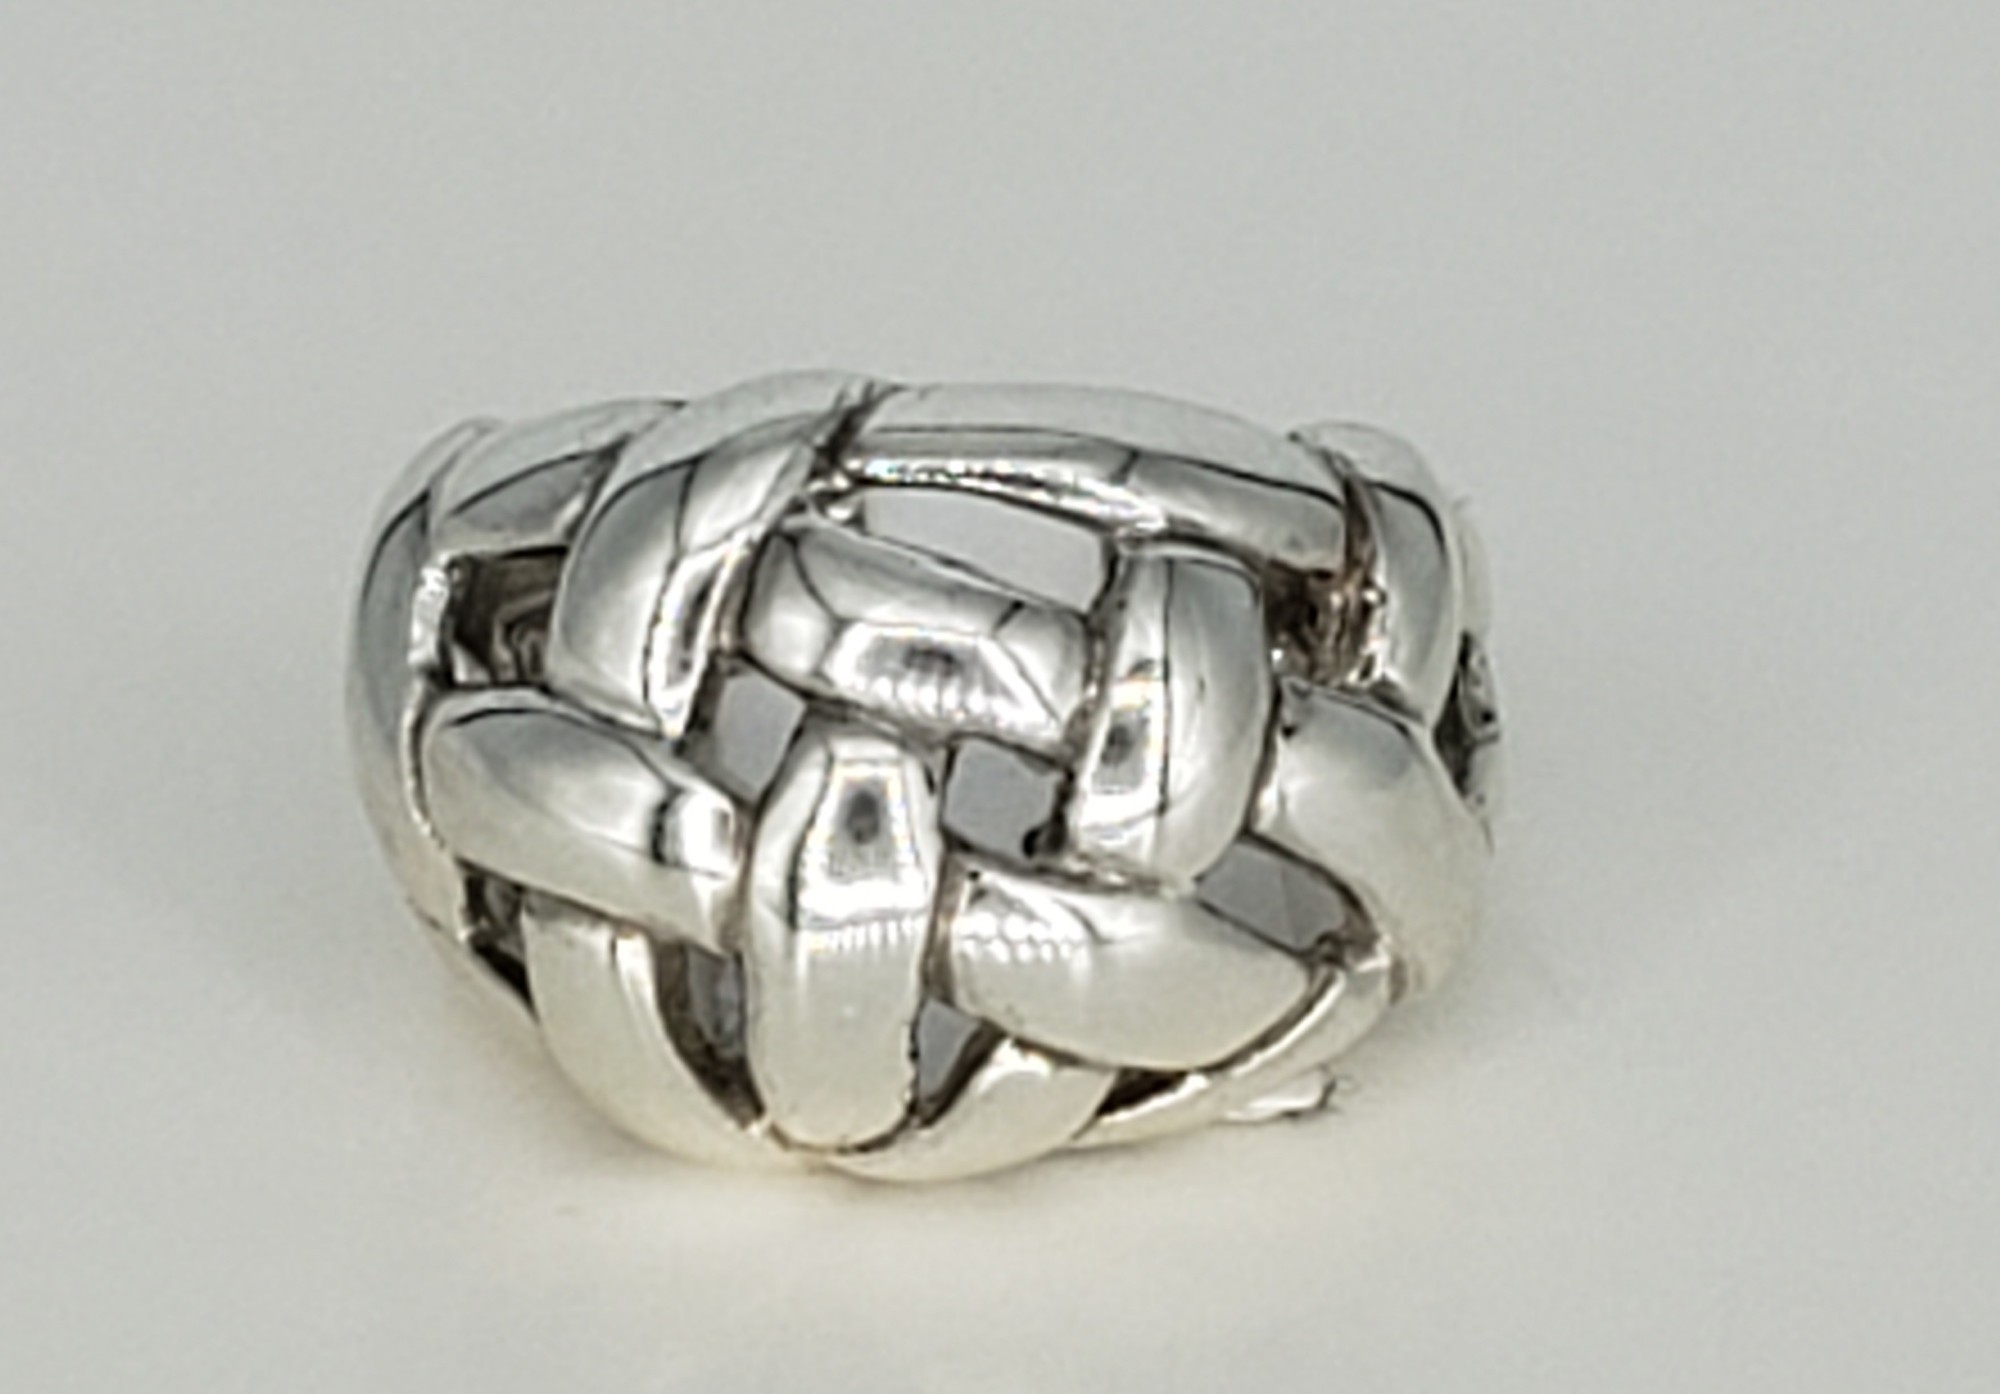 Open Basketweave Design Dome Ring
Sterling Silver

Looks Great and Comfortable.